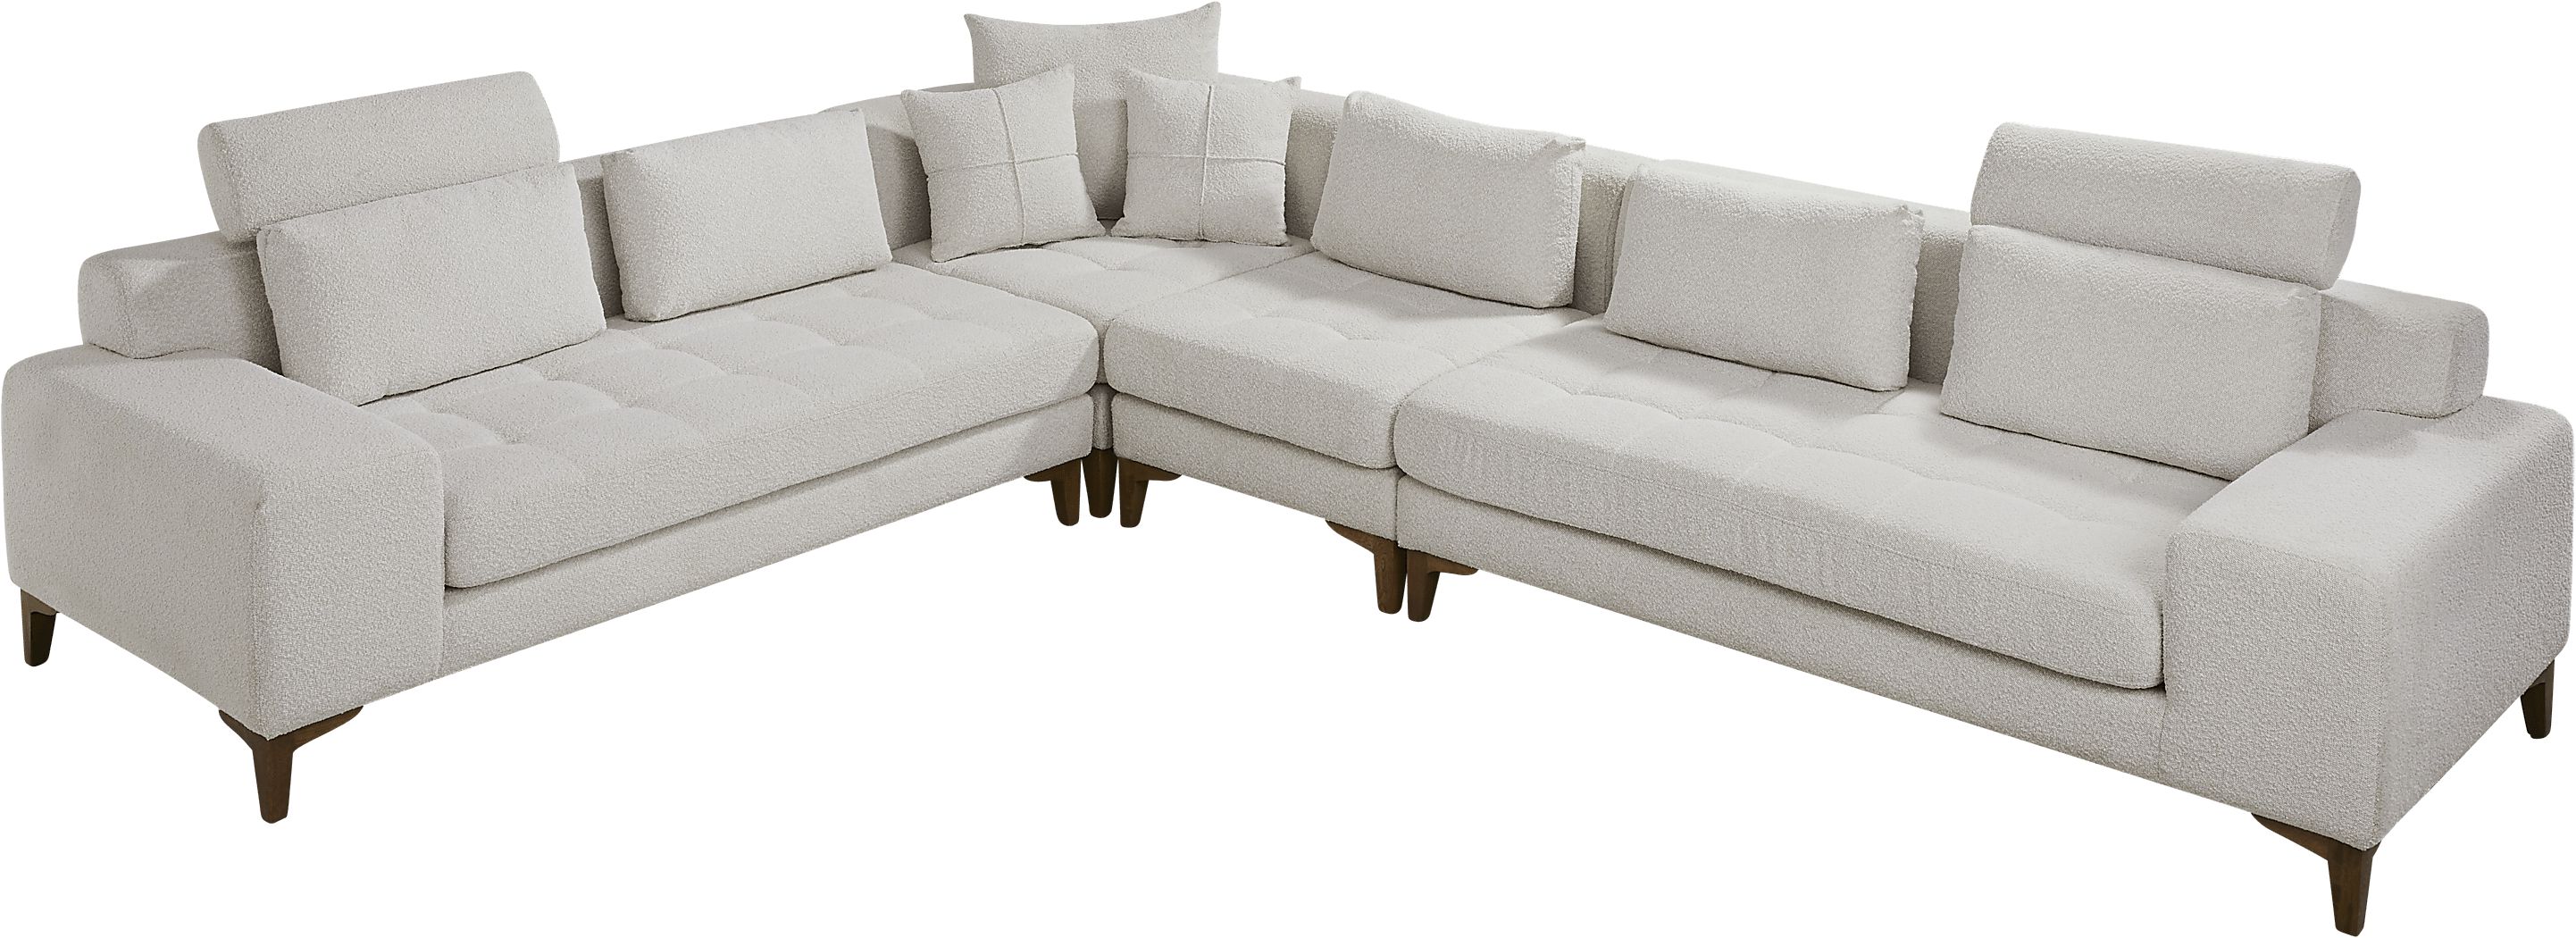 Mercer Place White 4 Pc Sectional